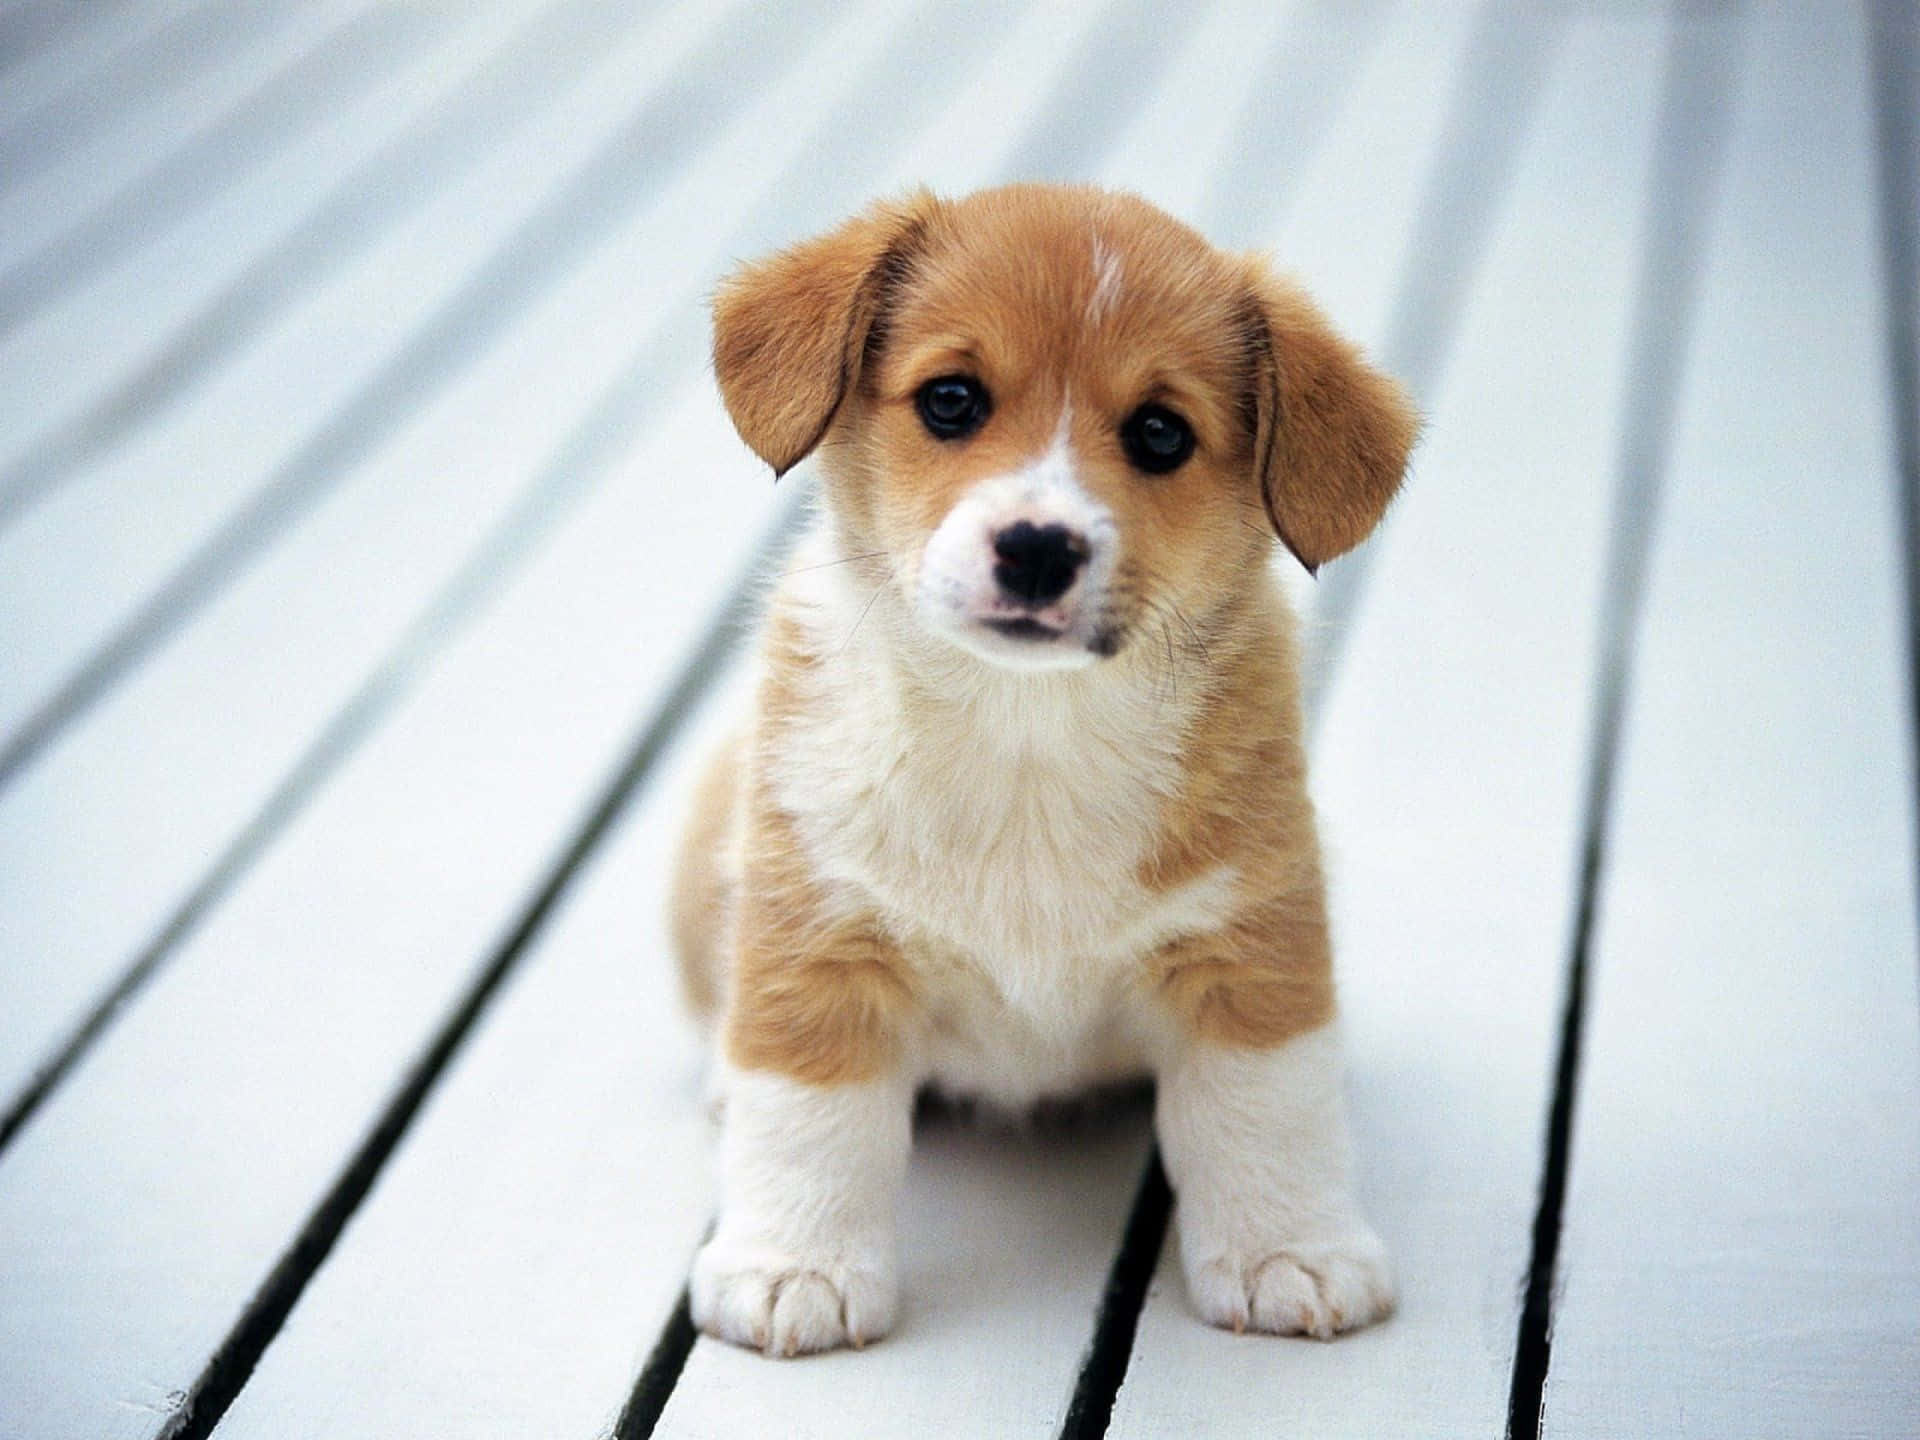 Cute Pet Puppy On White Wood Floor Picture